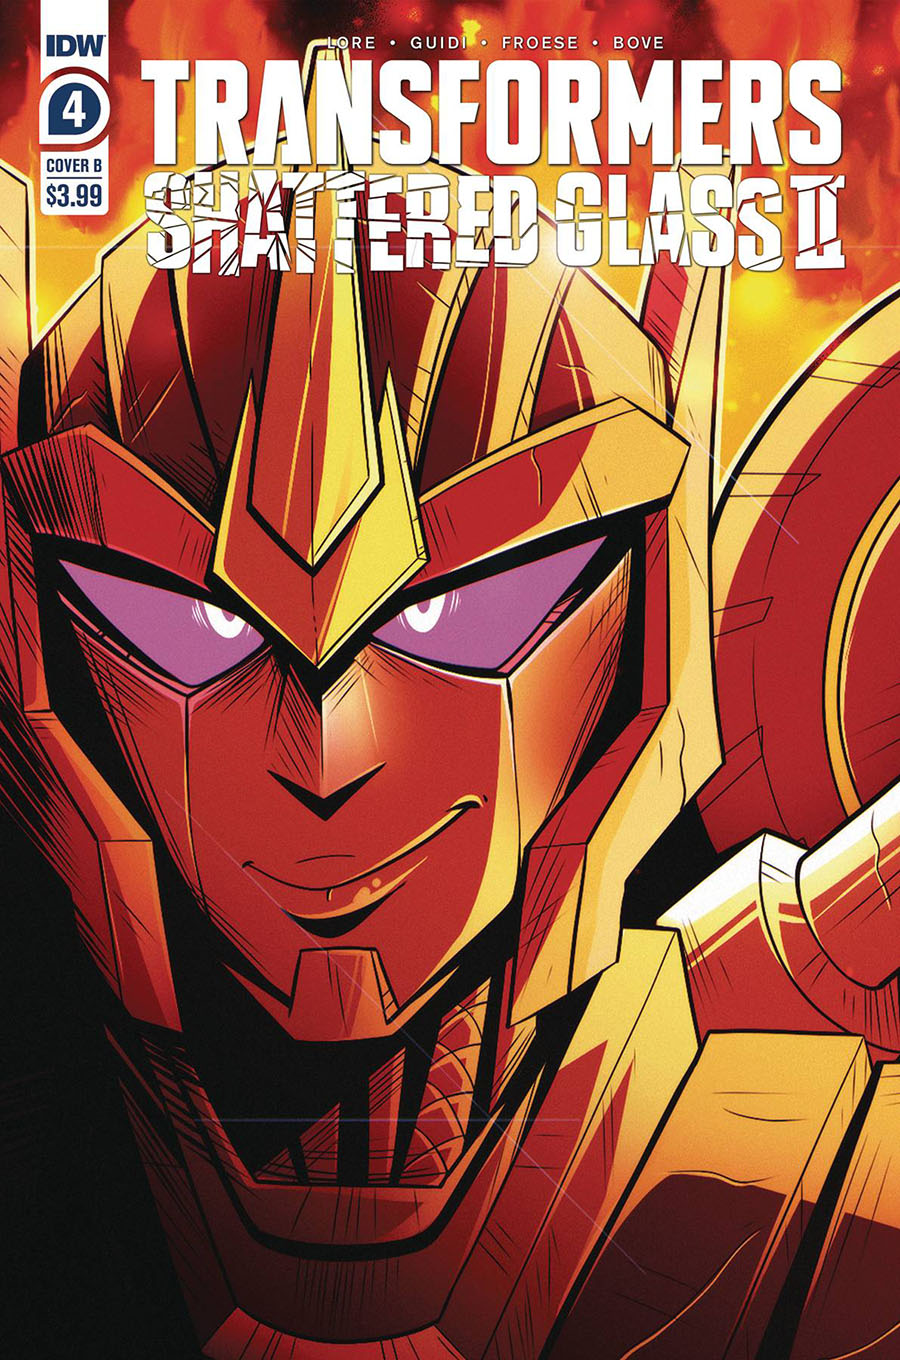 Transformers Shattered Glass II #4 Cover B Variant Ashleigh Phillips Cover